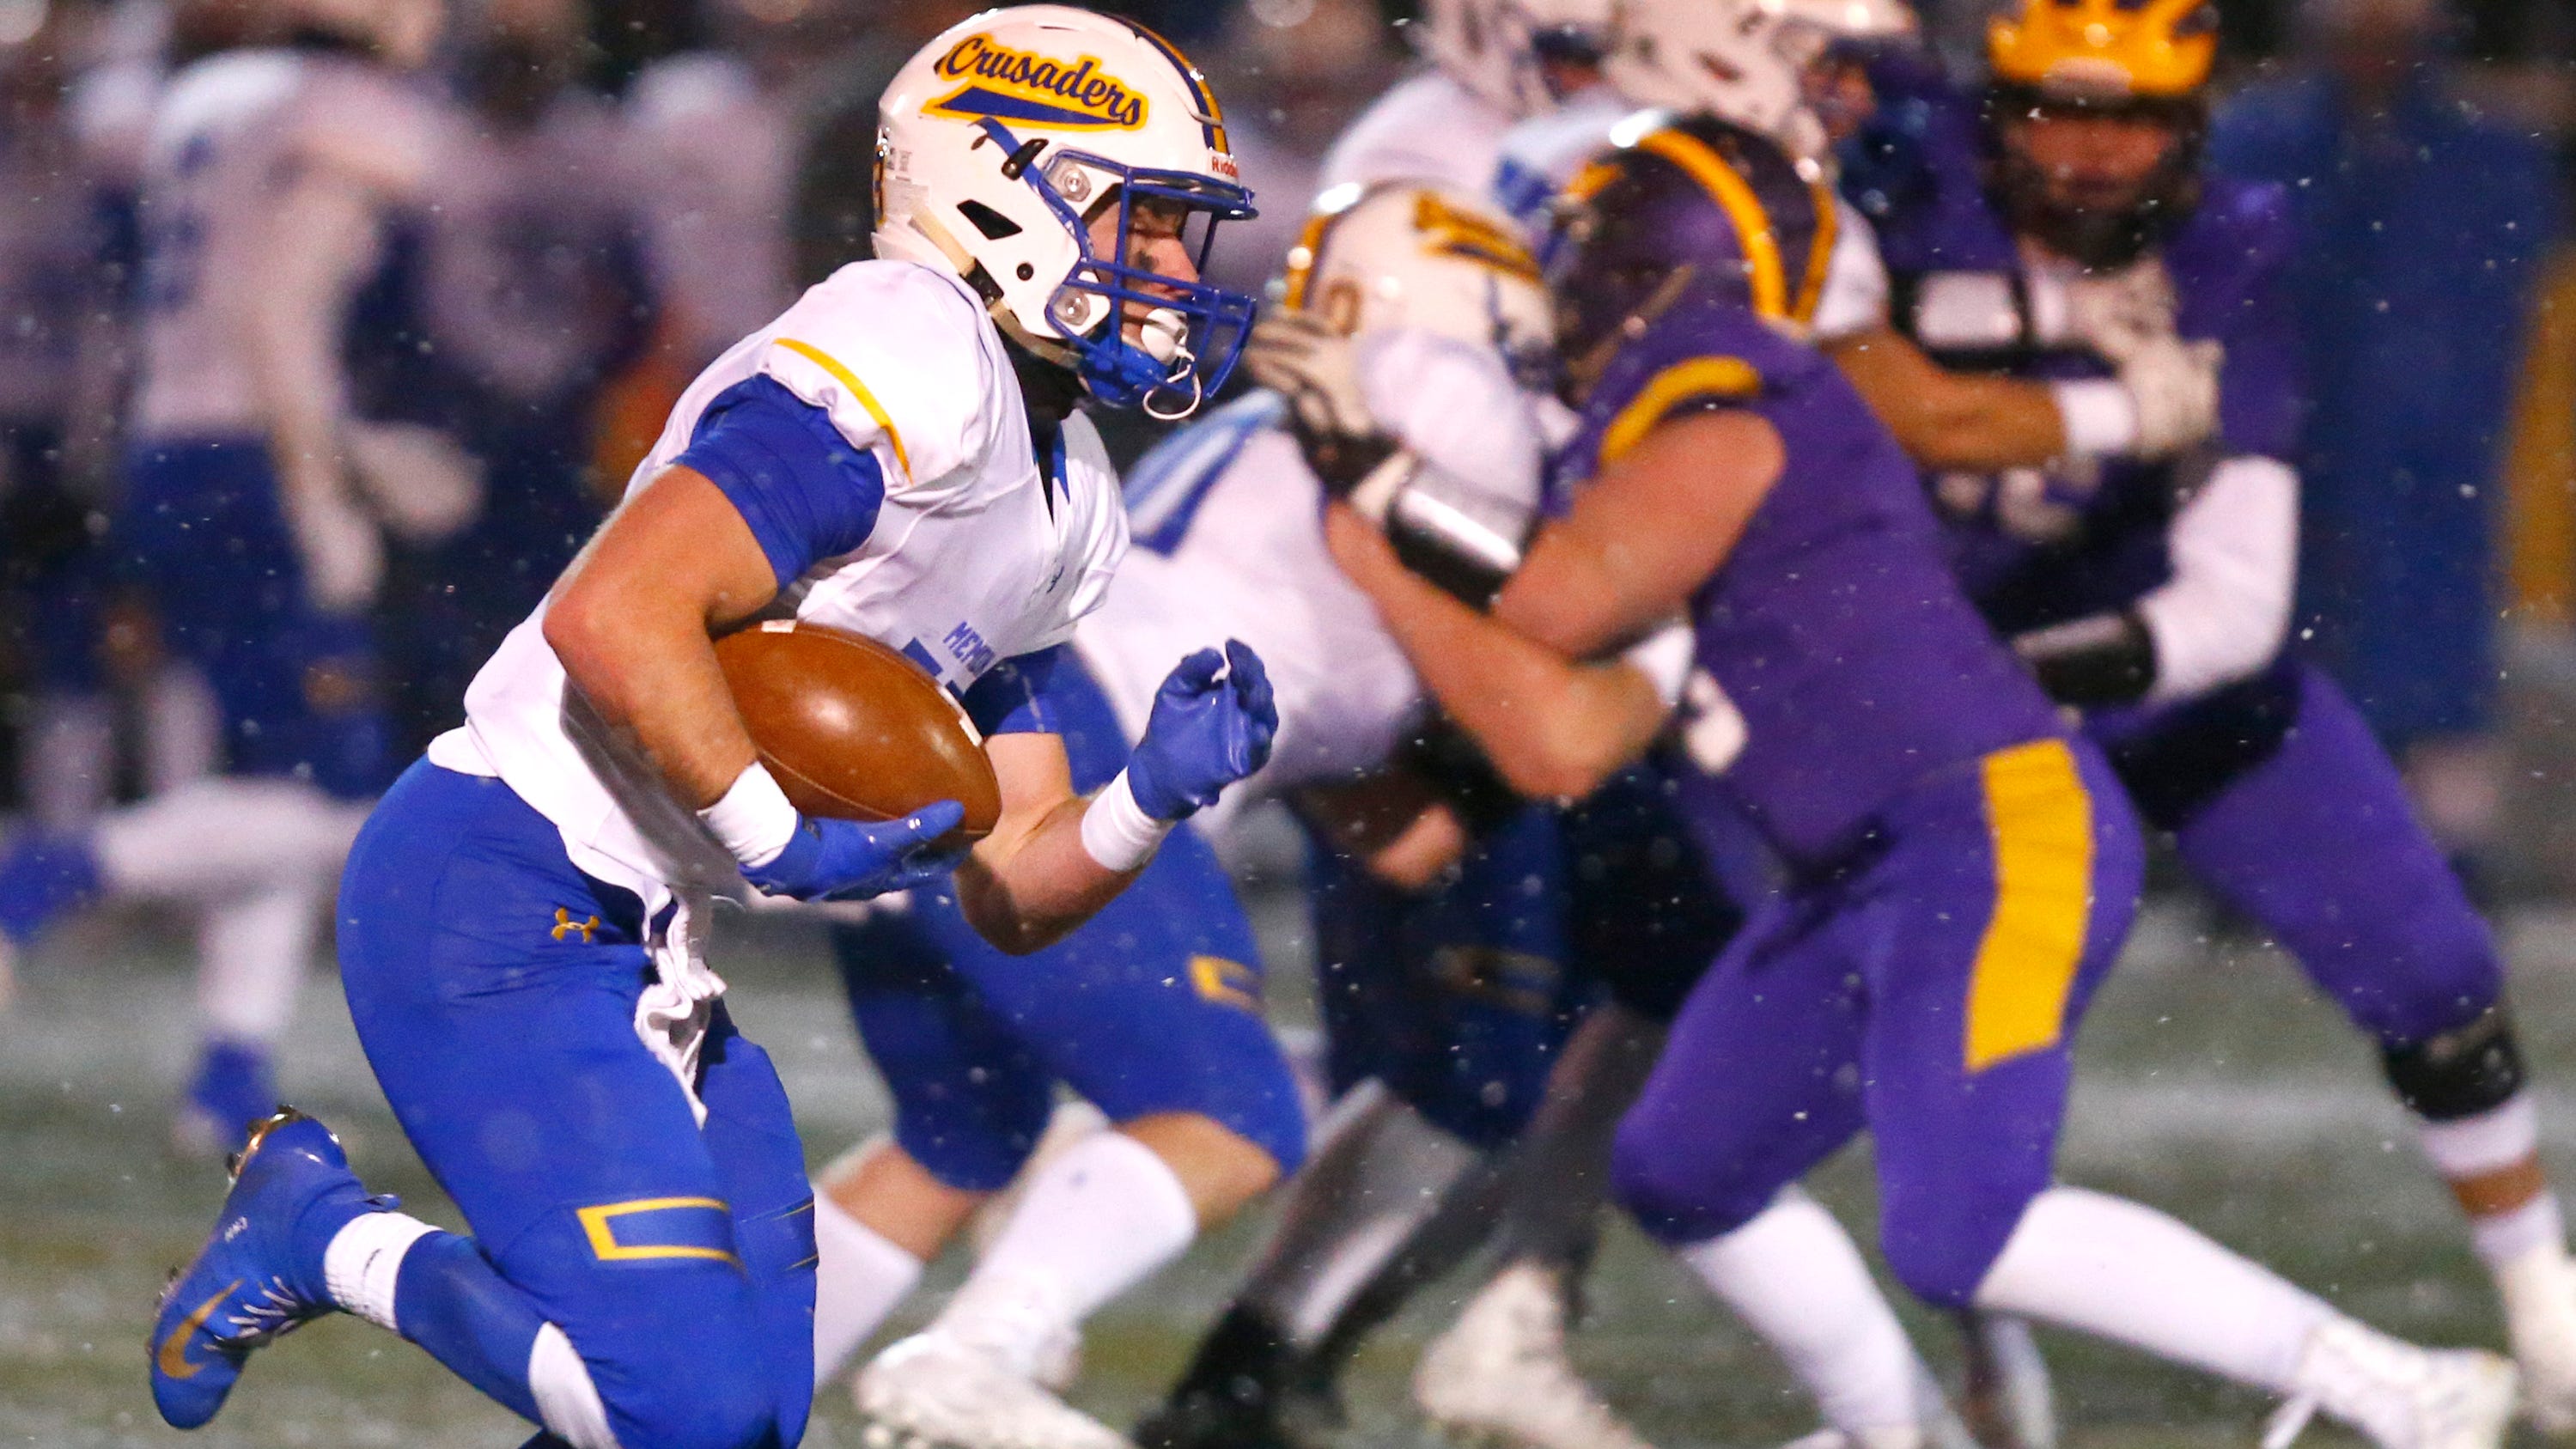 WIAA football state semifinal results, championships schedule